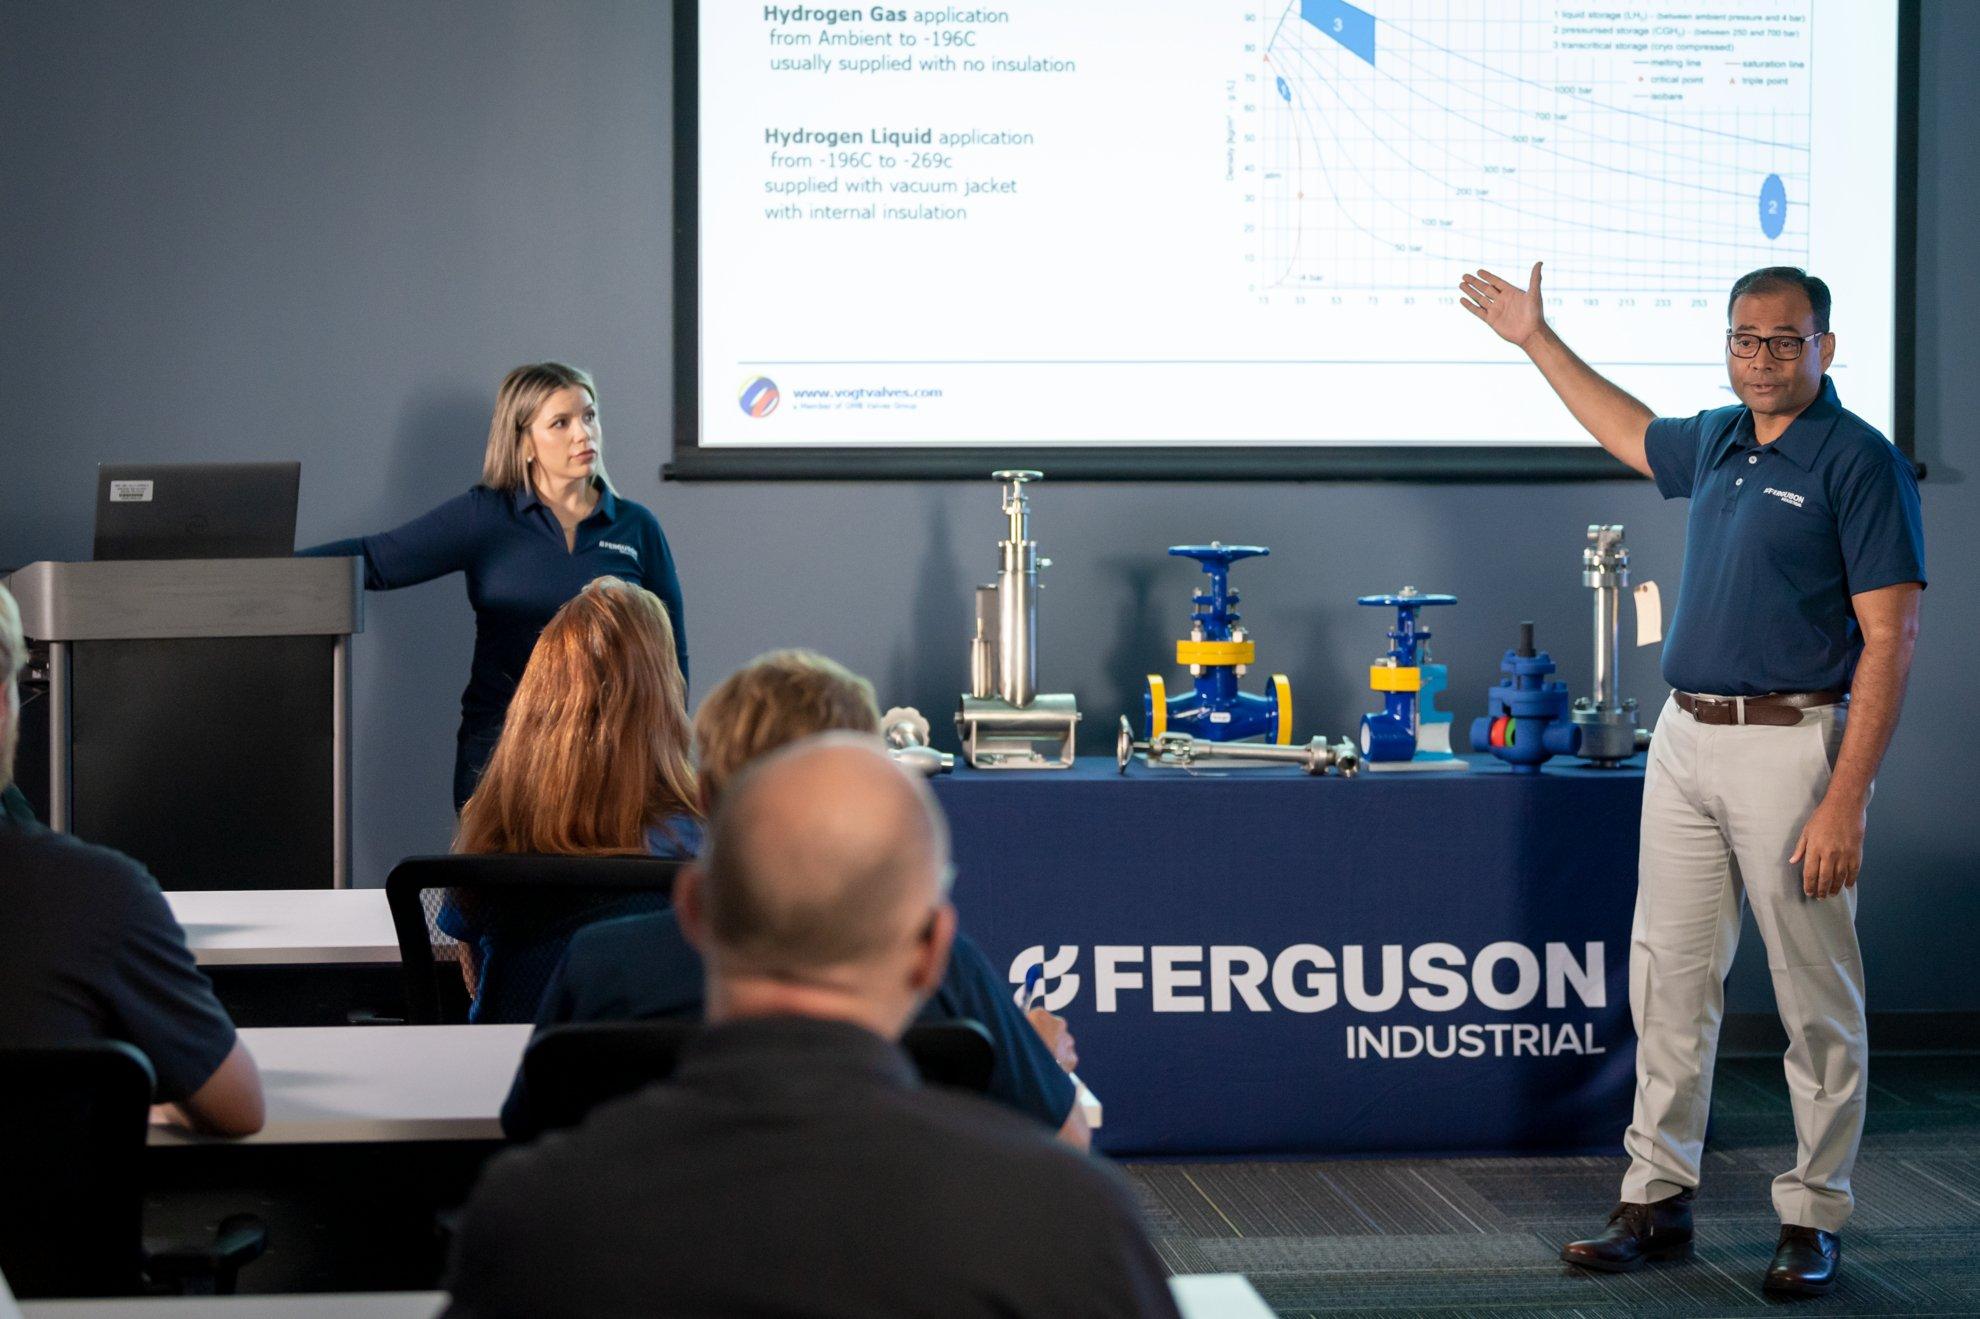 Two Ferguson Industrial associates instruct about types of pipe material for different purposes in a conference room.